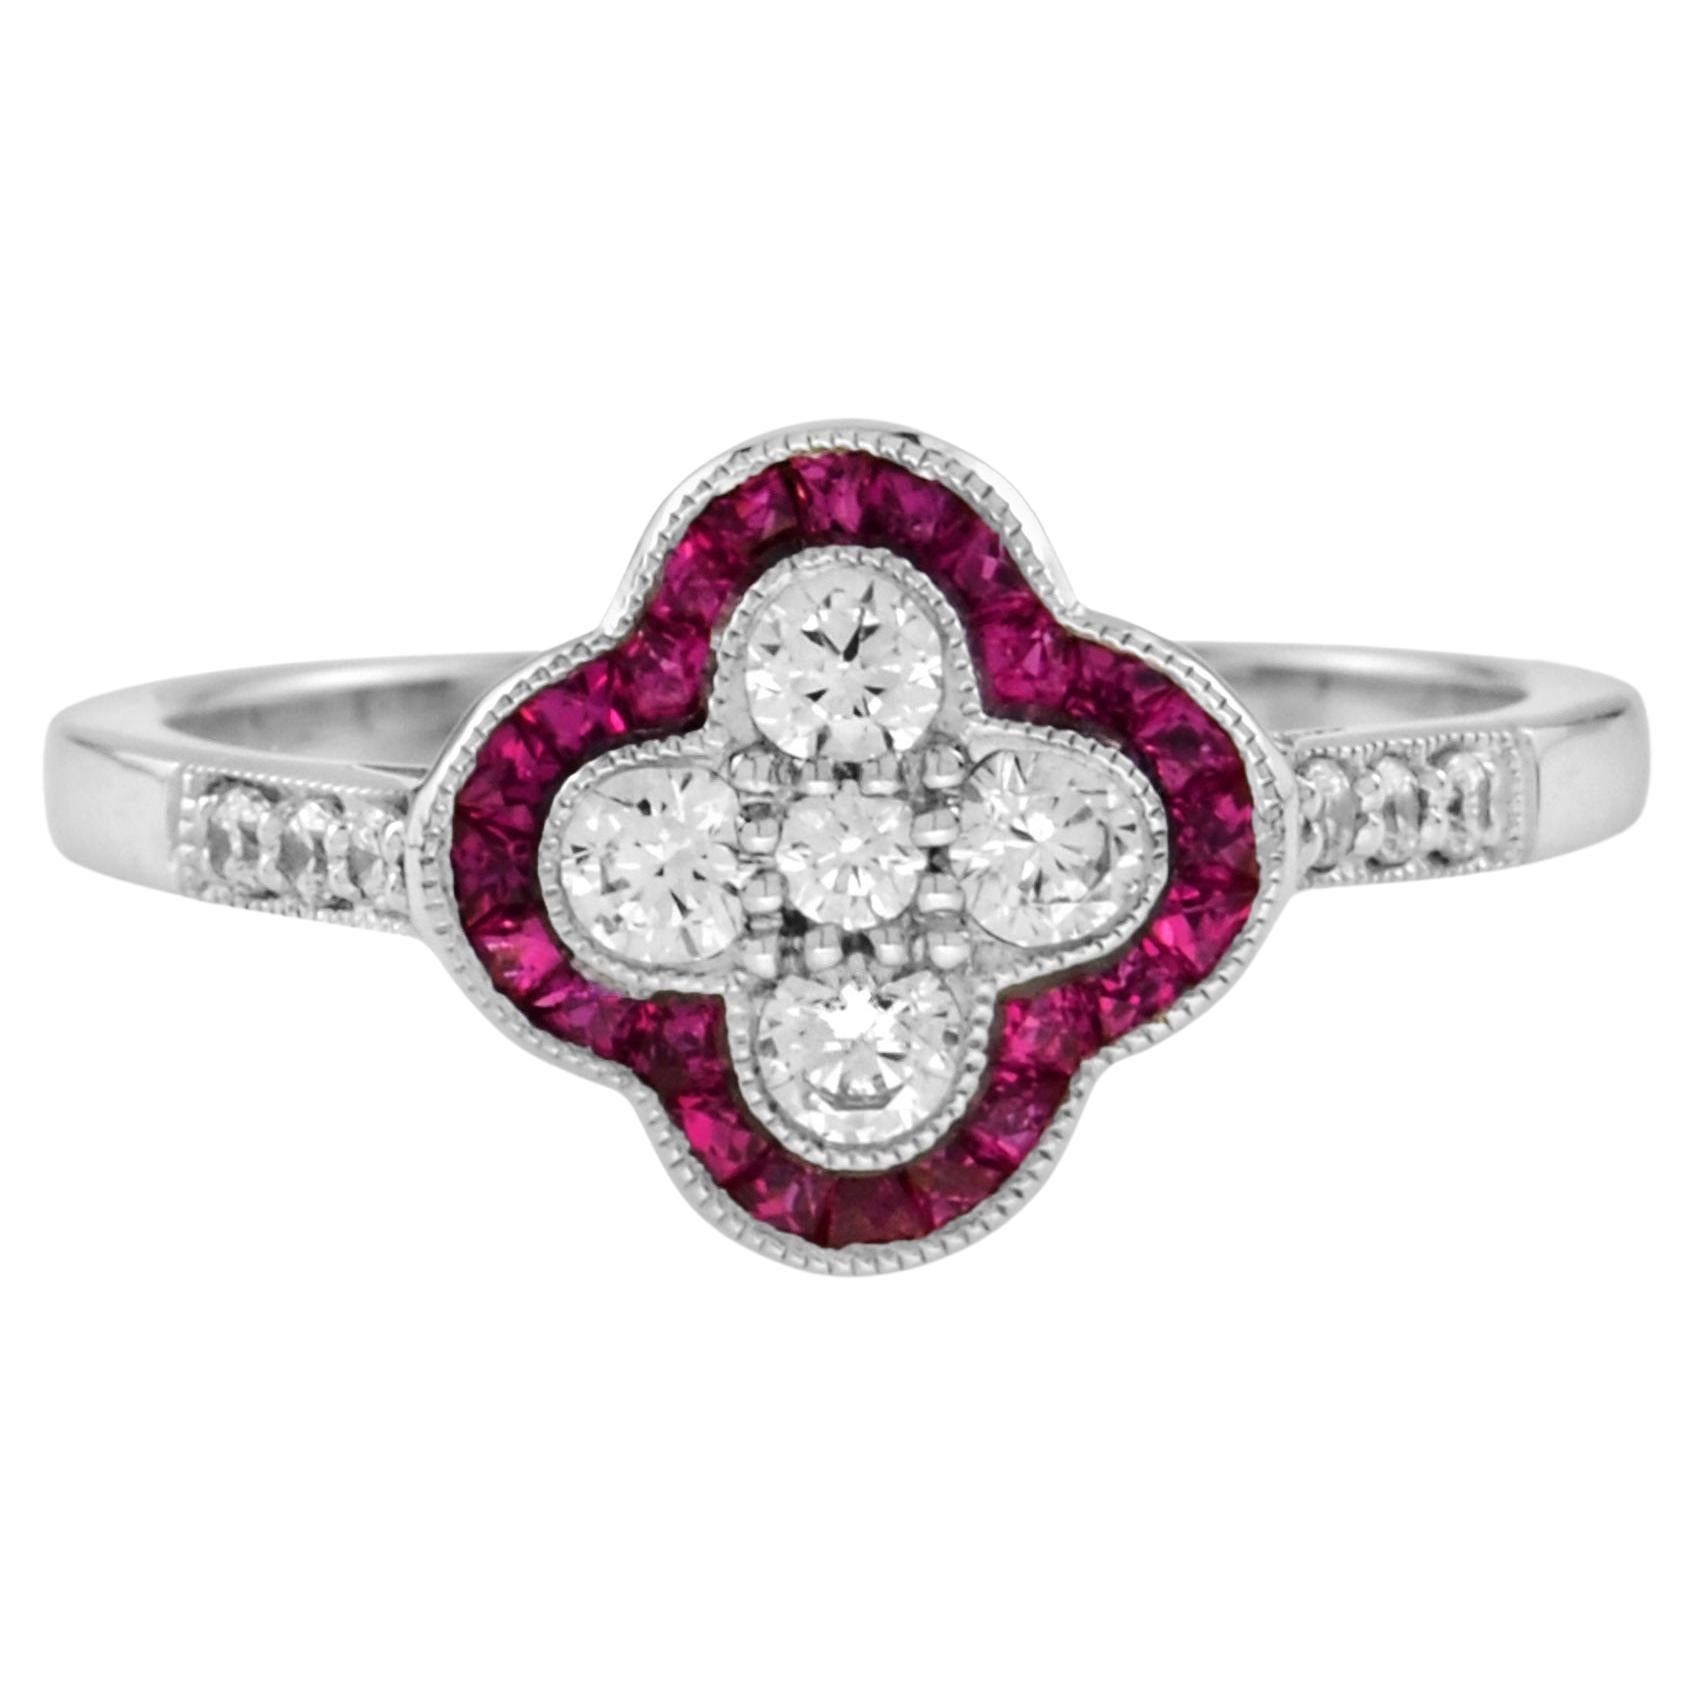 For Sale:  Diamond and Ruby Art Deco Style Floral Cluster Ring in 18K White Gold